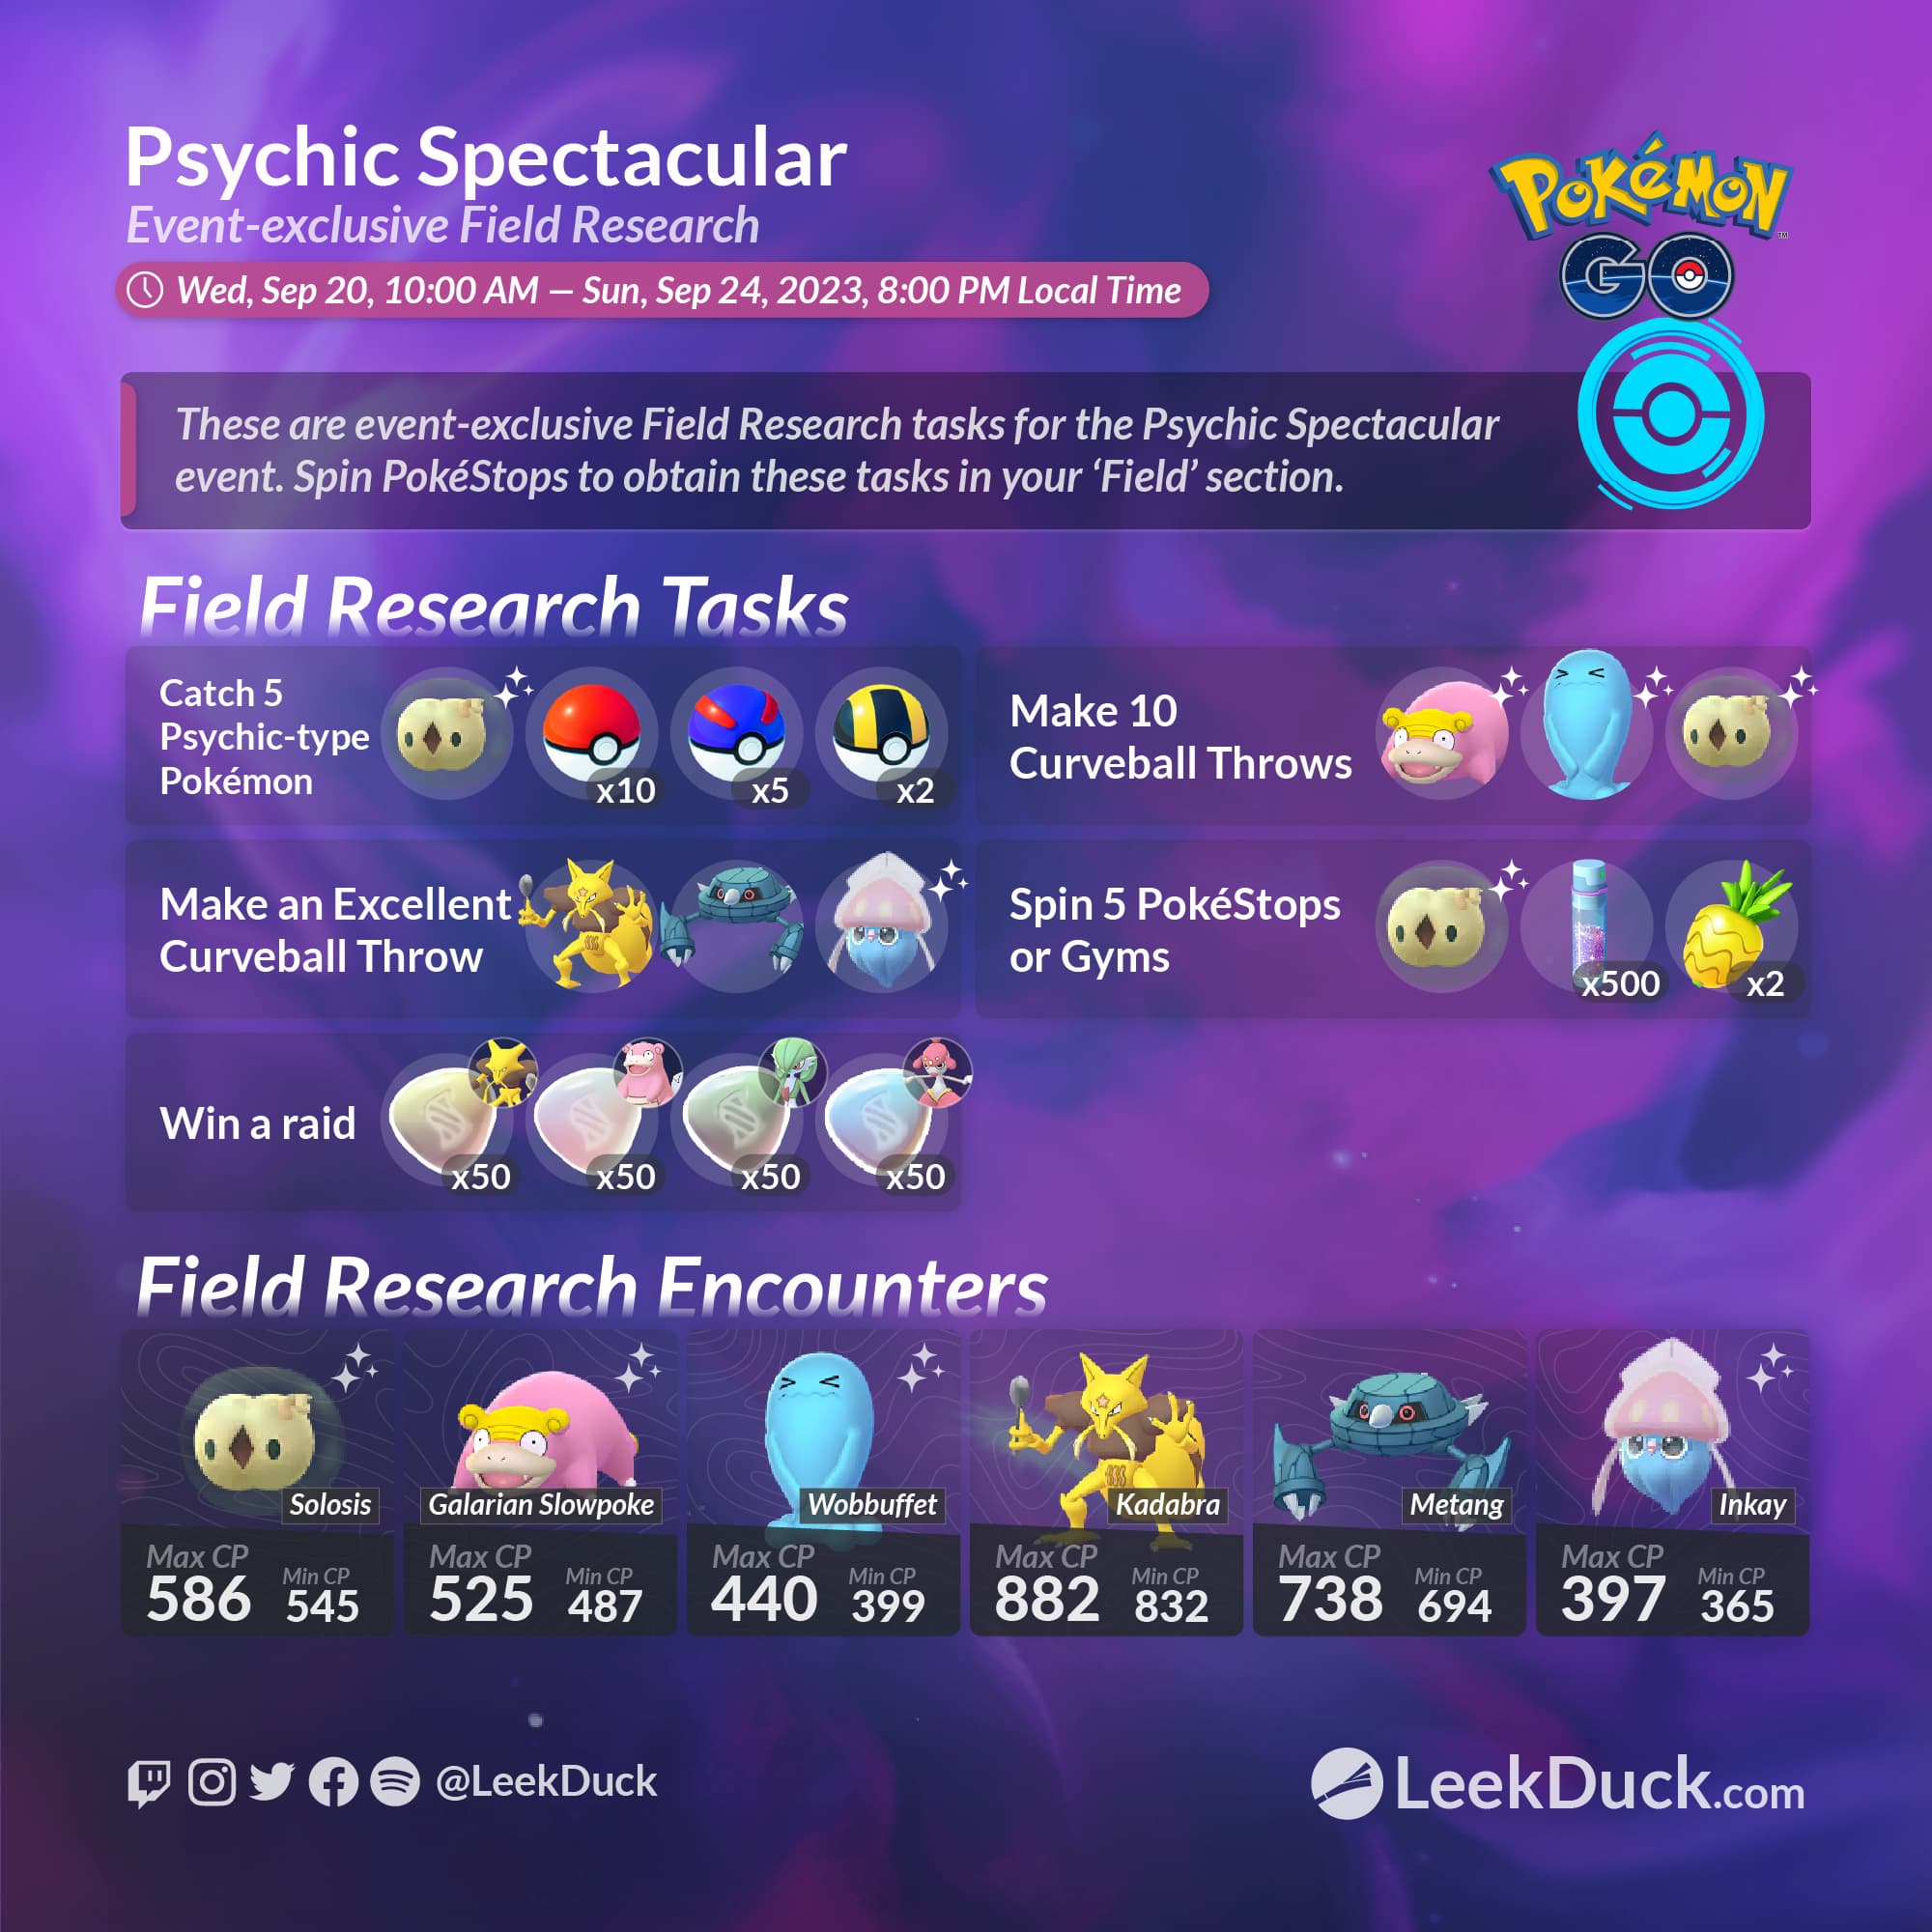 The Psychic Spectacular event is back! – Pokémon GO